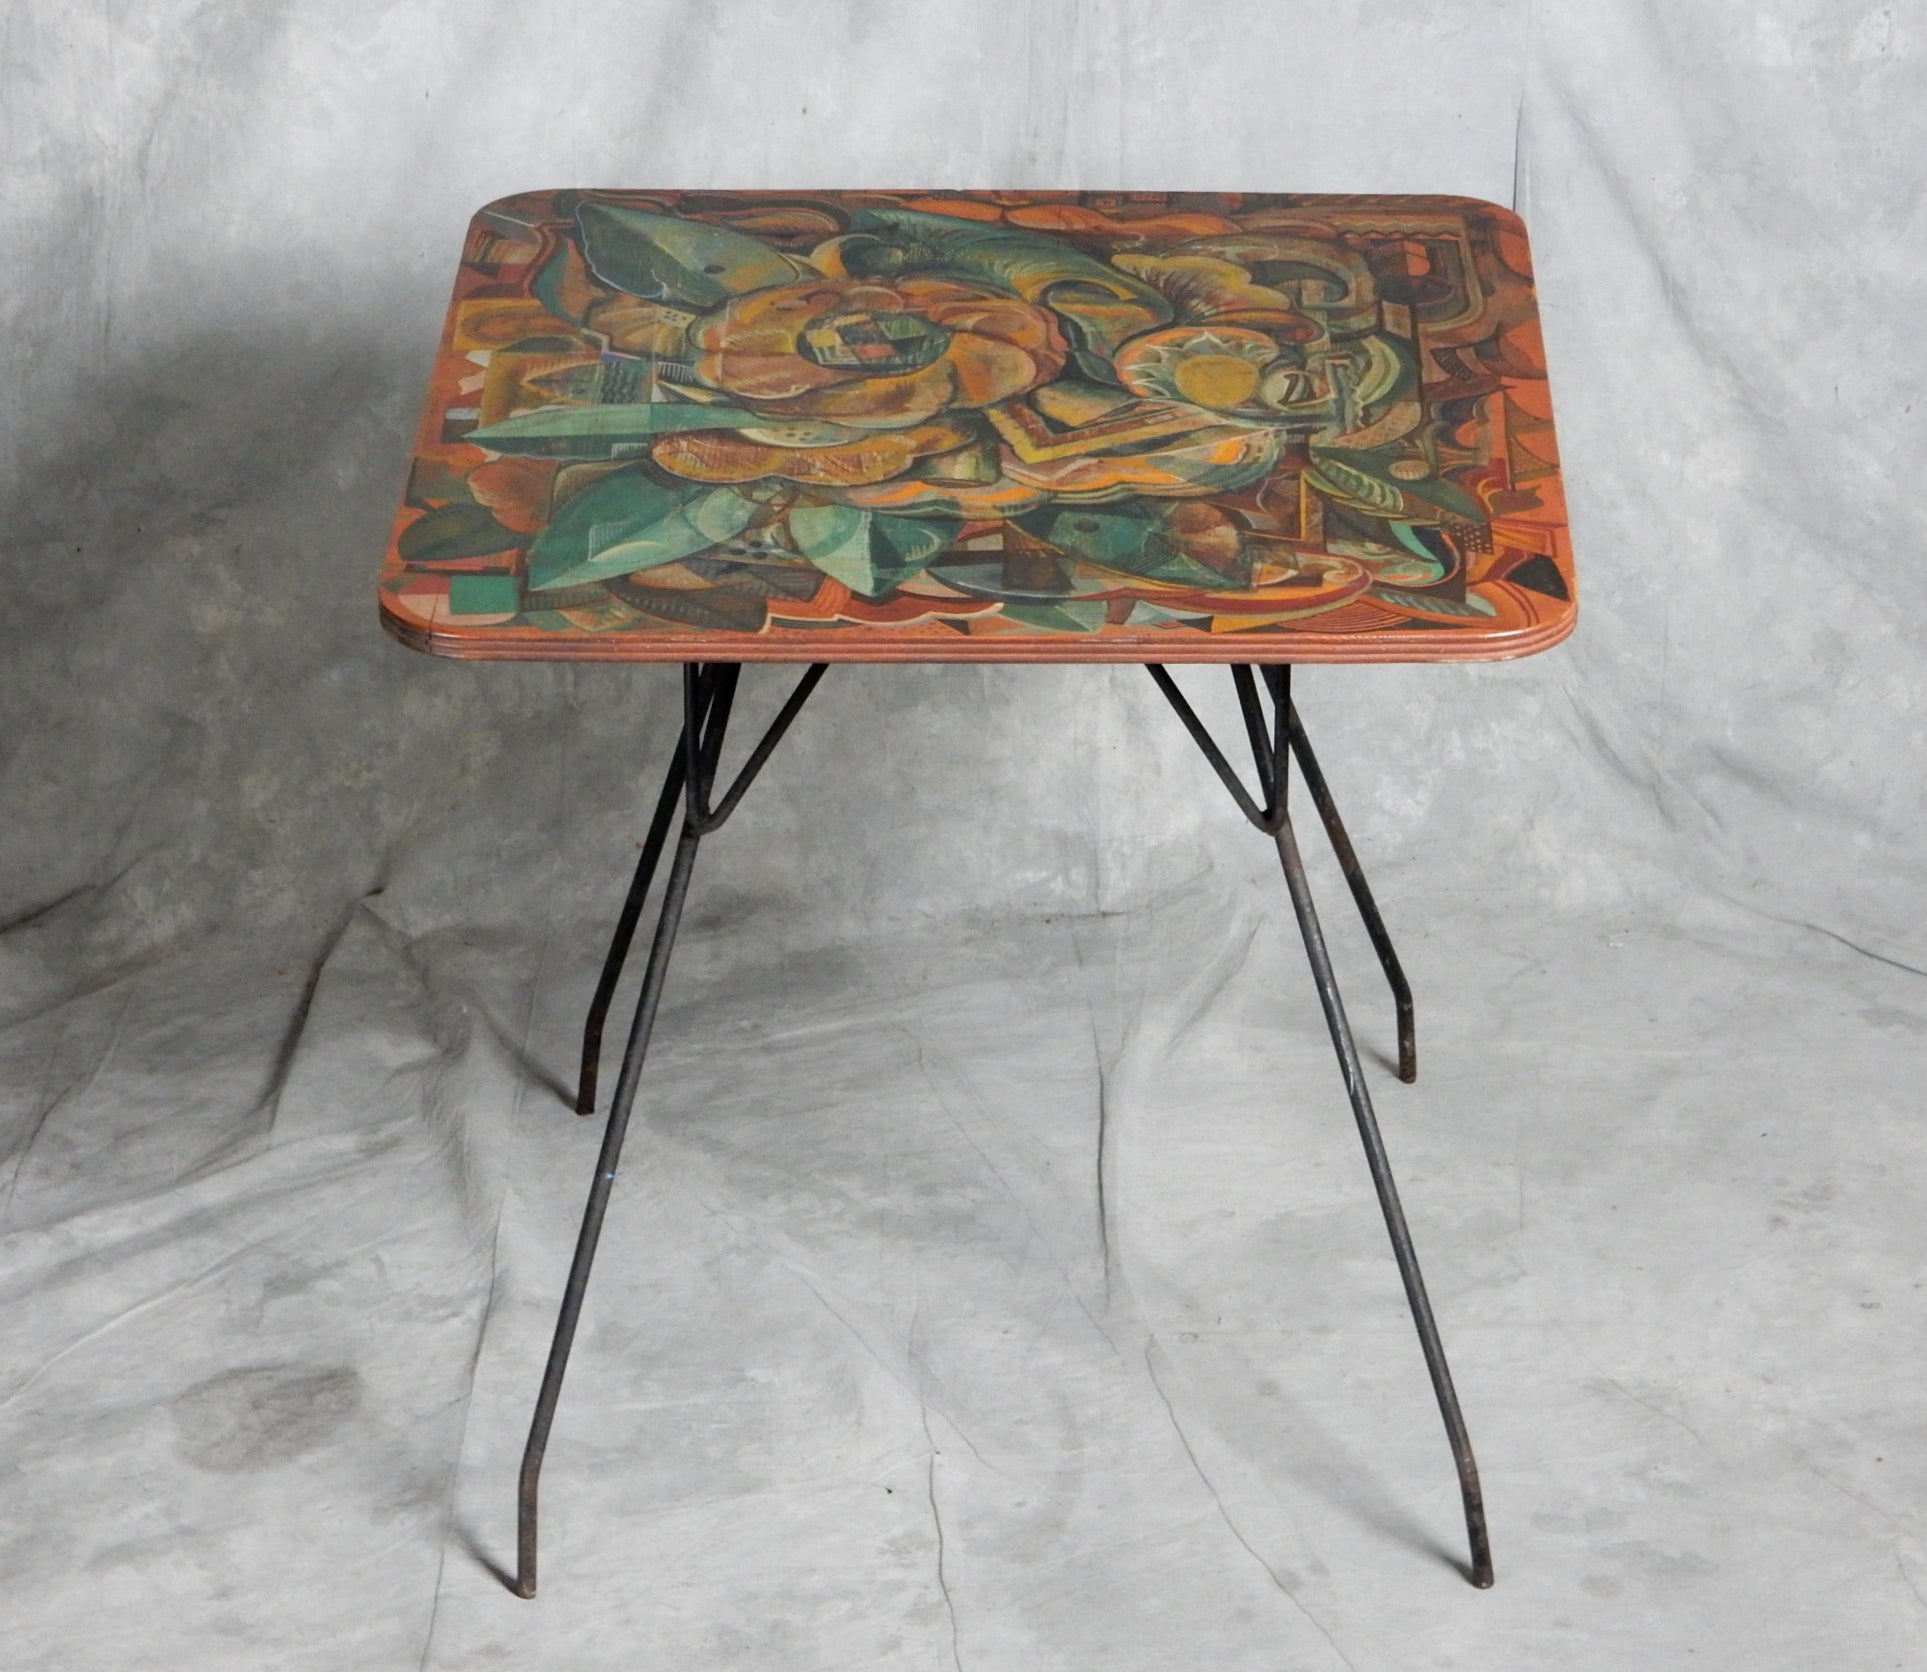  Early 20th-Century Avant-Garde Painted Table with Mexican Muralism Painting For Sale 5